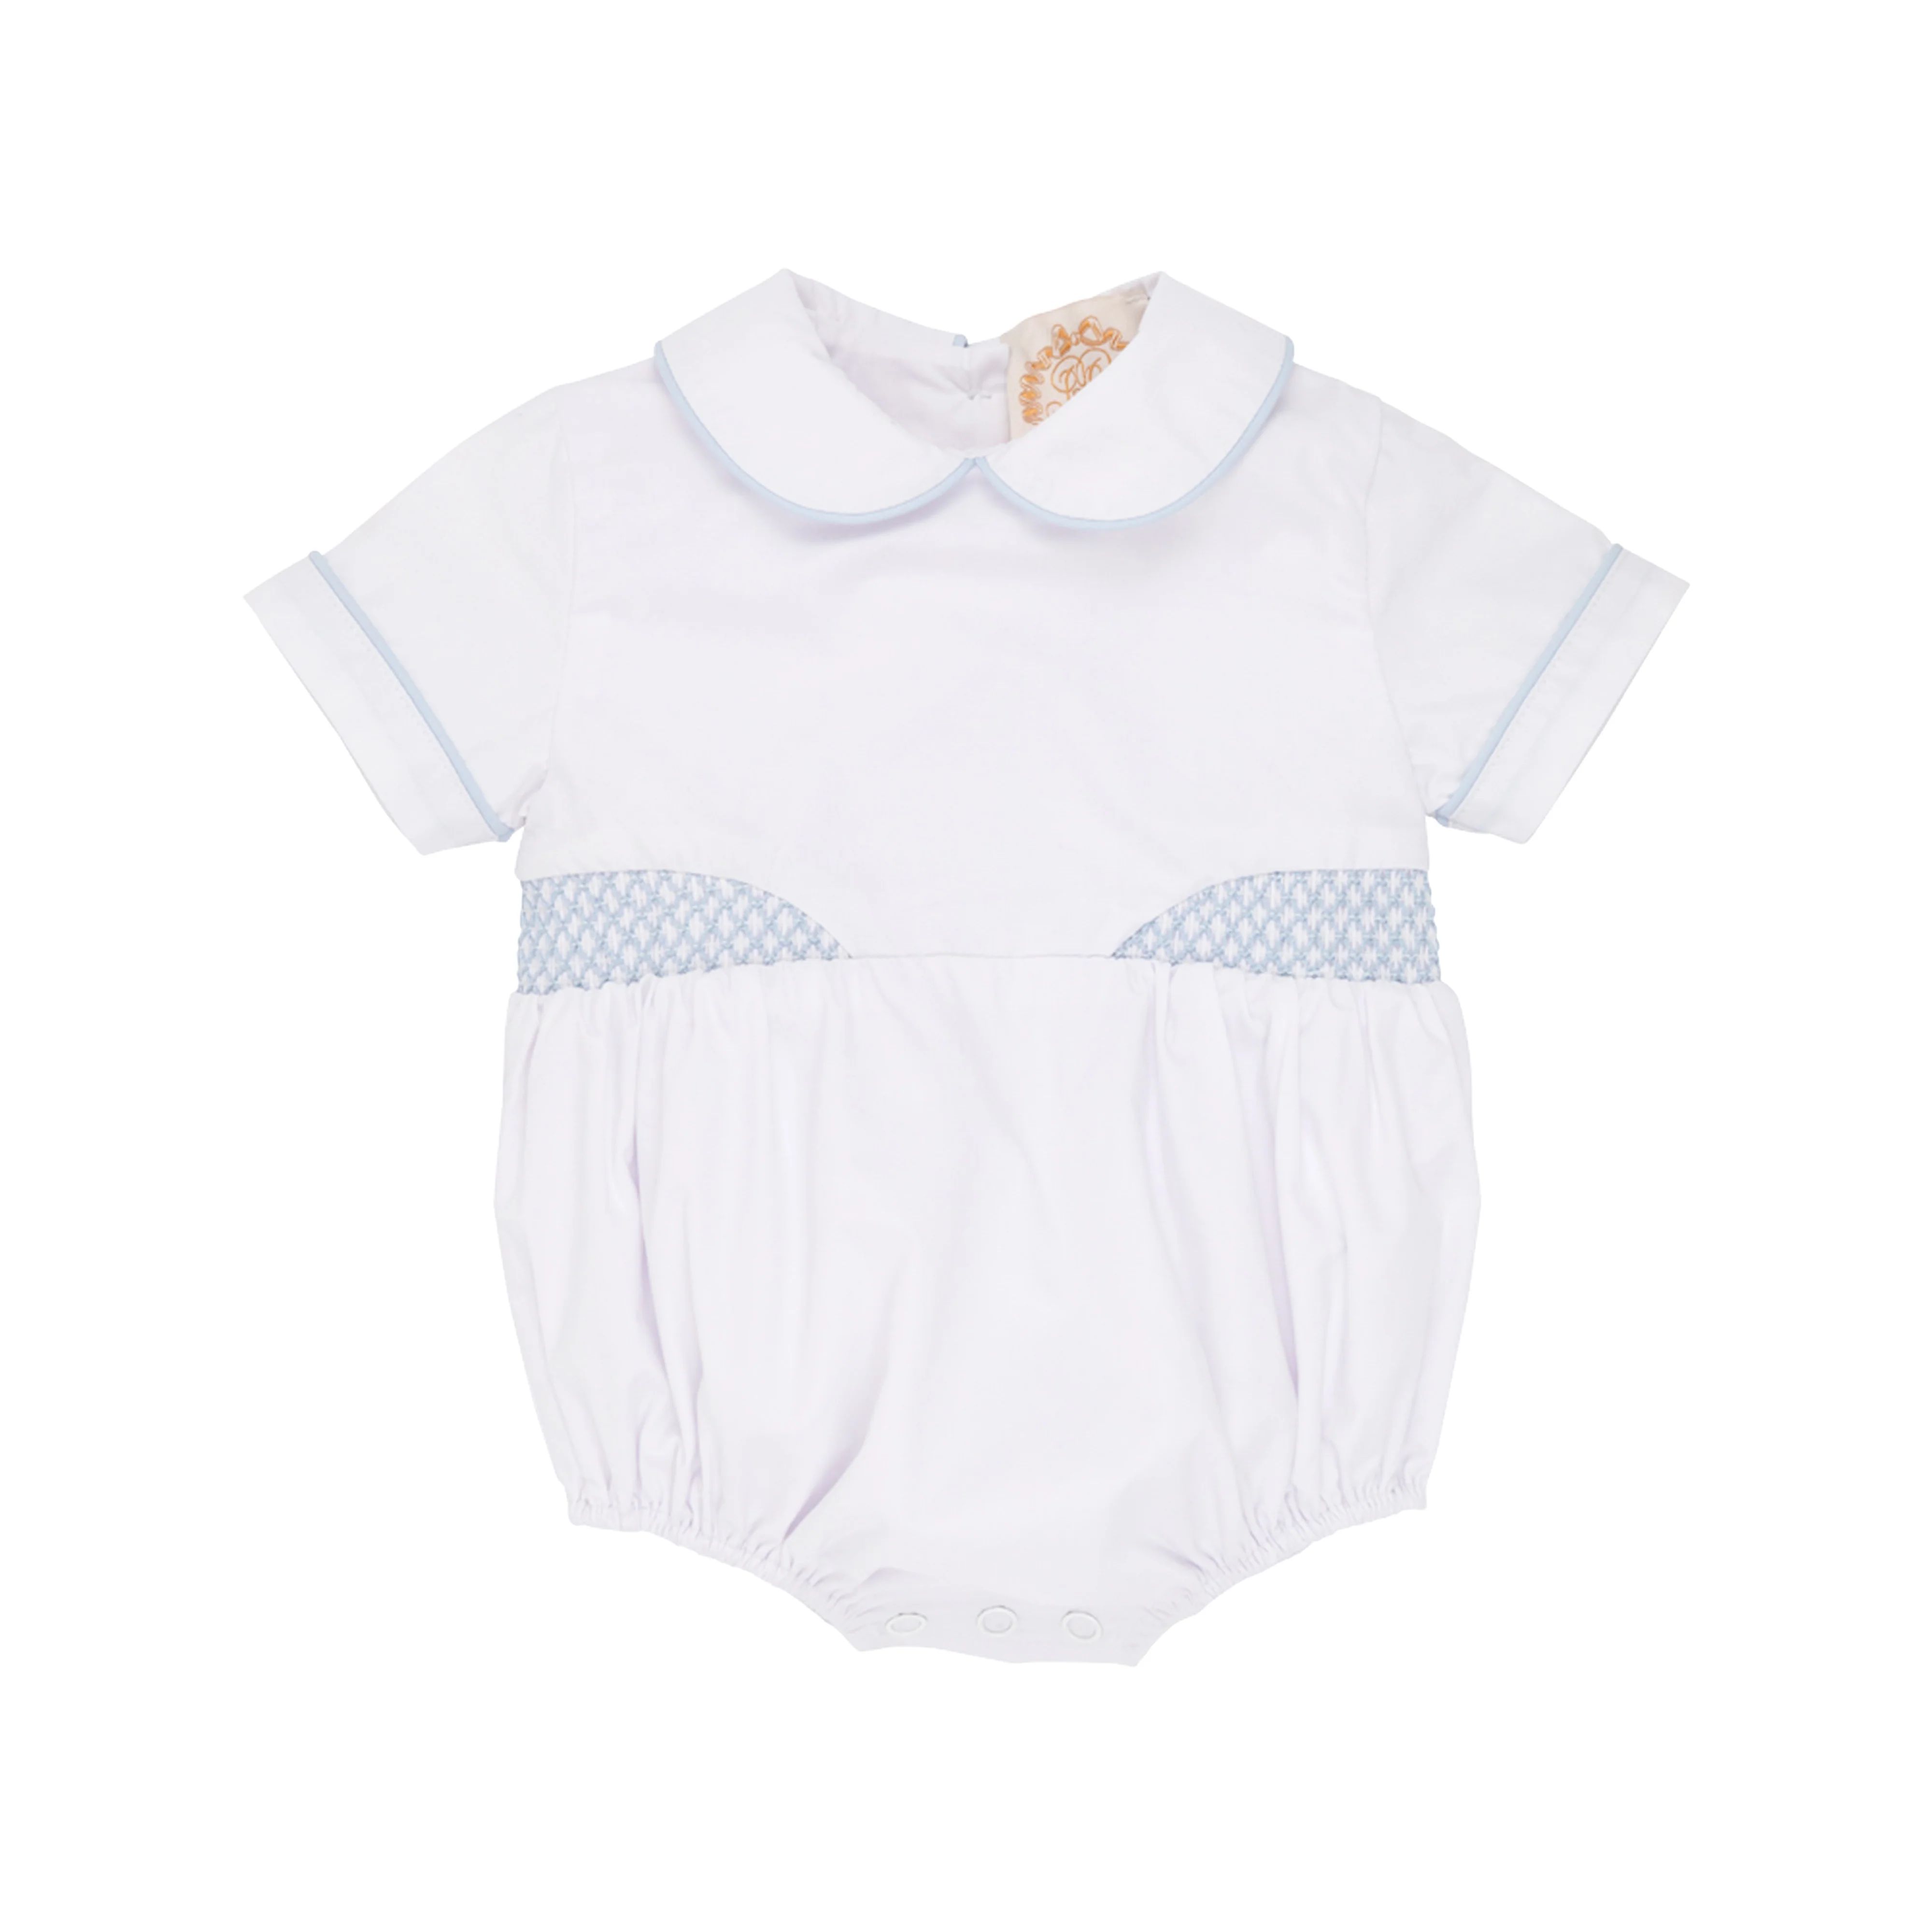 Brently Bubble in Worth Ave White with Buckhead Blue Smocking | Loozieloo